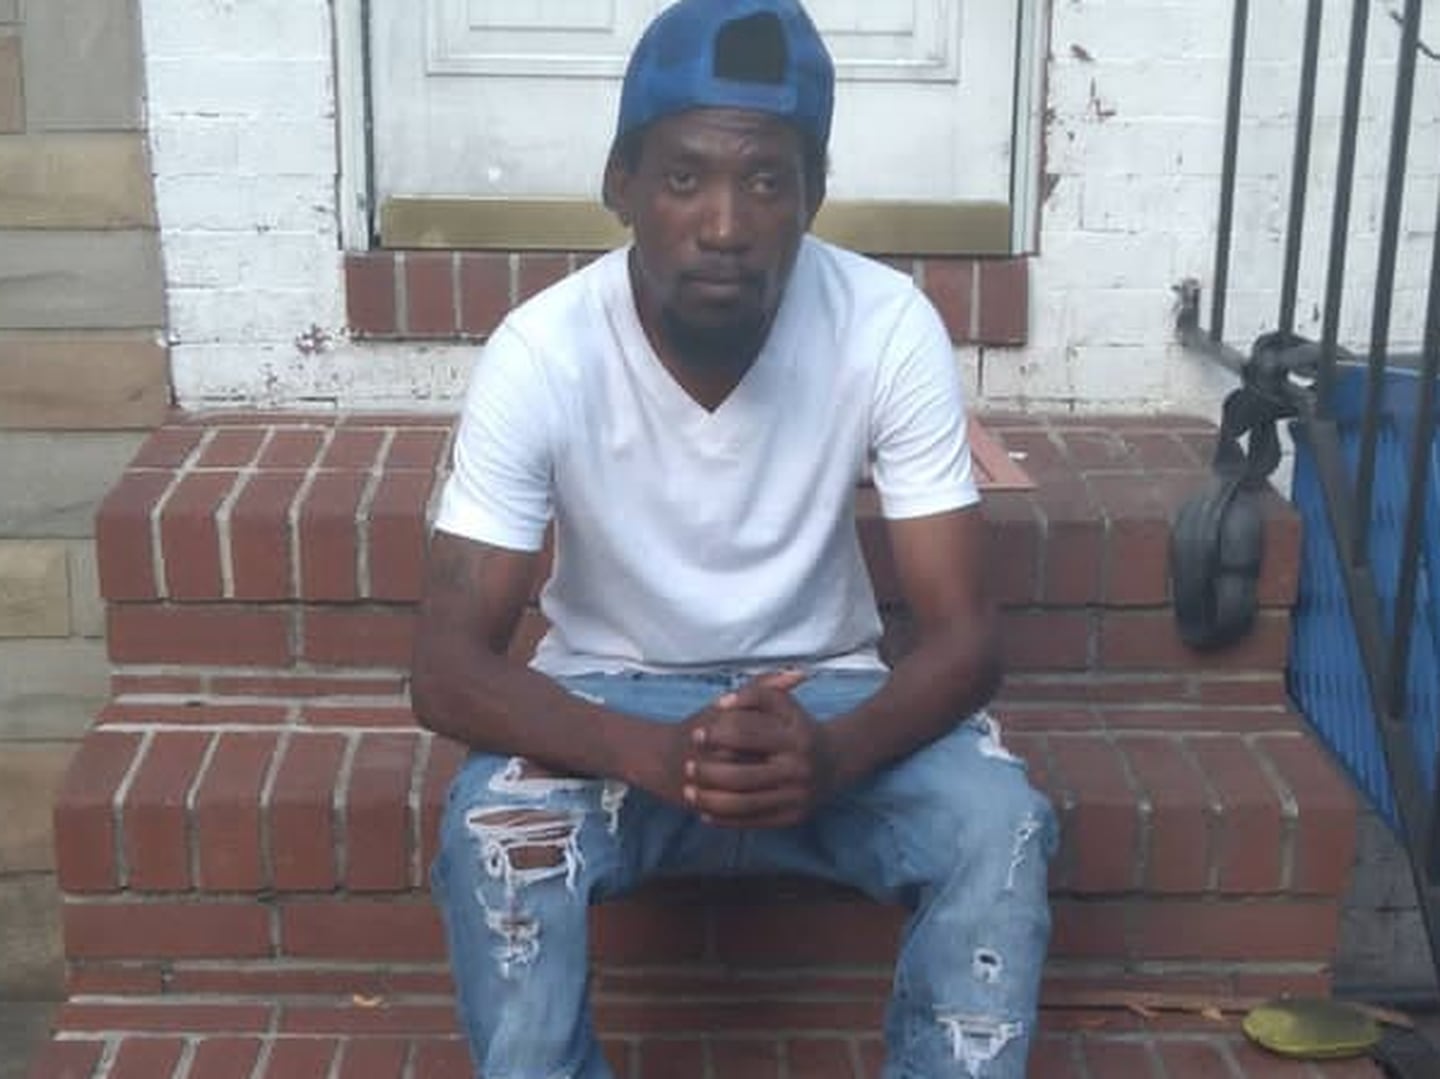 Javarick Gantt, 34, sits on a stoop and poses for a photograph at an unknown location in Baltimore. Gantt was murdered by an unknown assailant at a state-run jail in the city earlier this month.